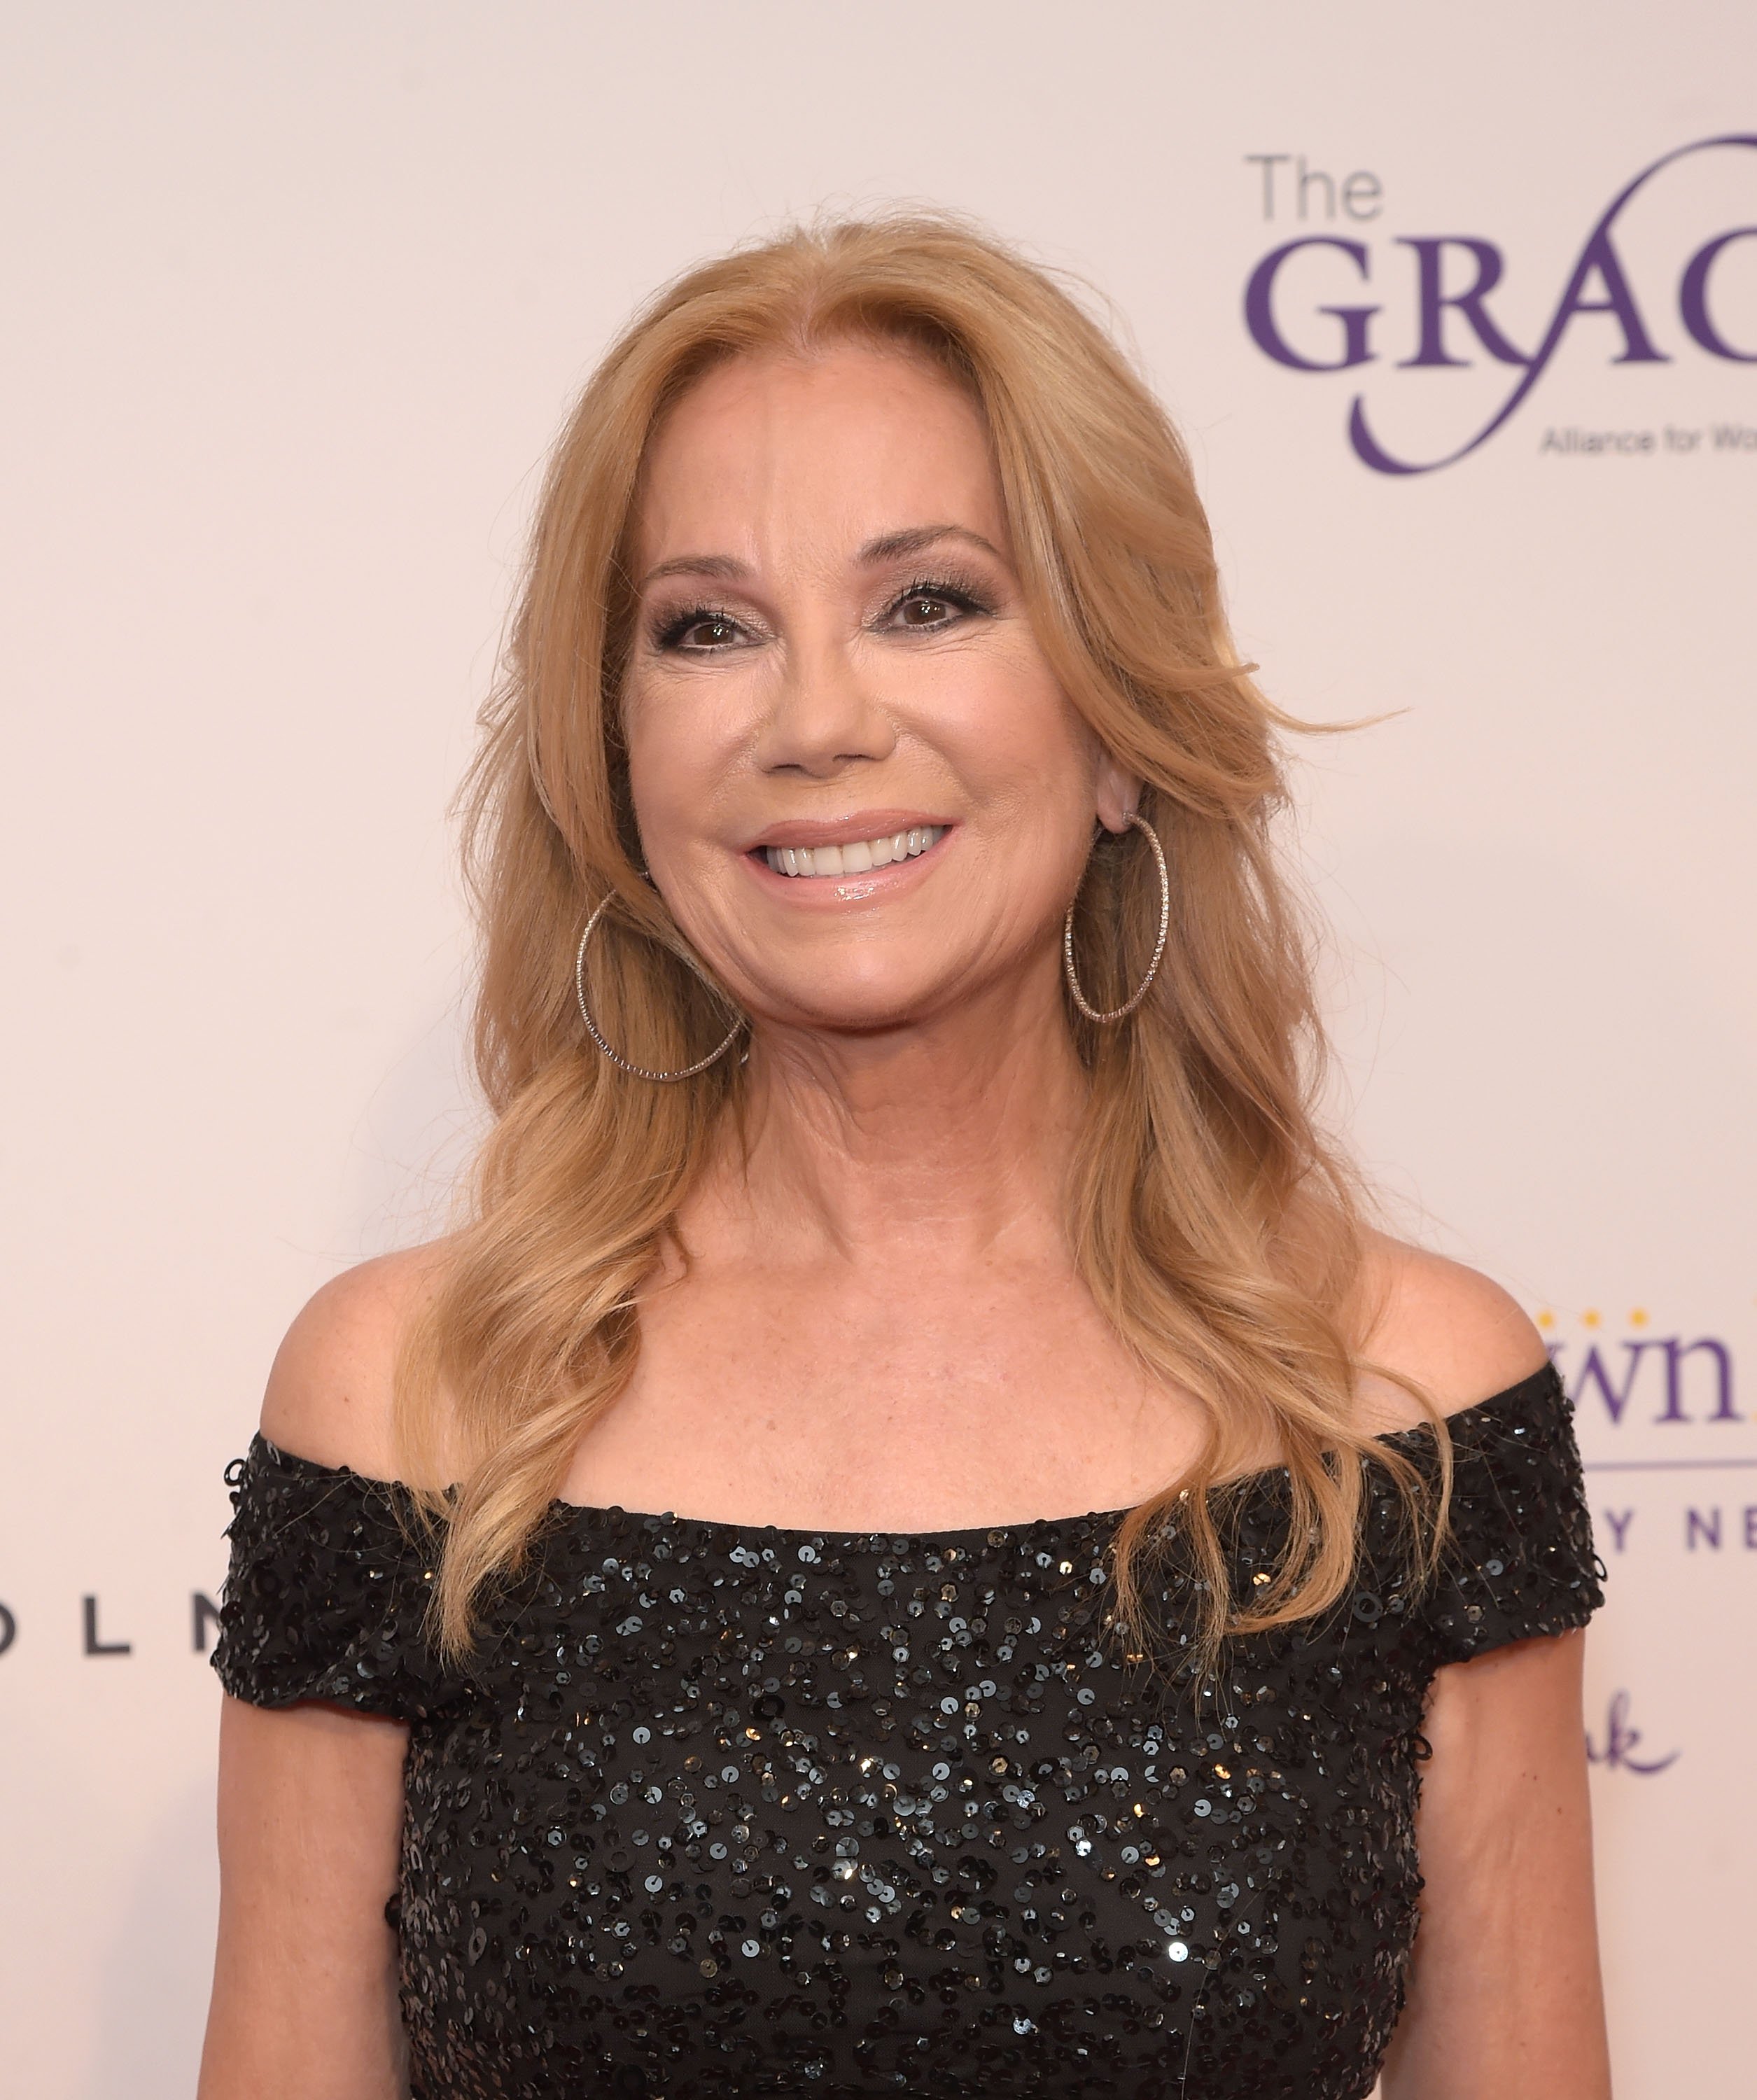 Kathie Lee Gifford pictured at the 41st Annual Gracie Awards Gala, 2016, California. | Photo: Getty Images